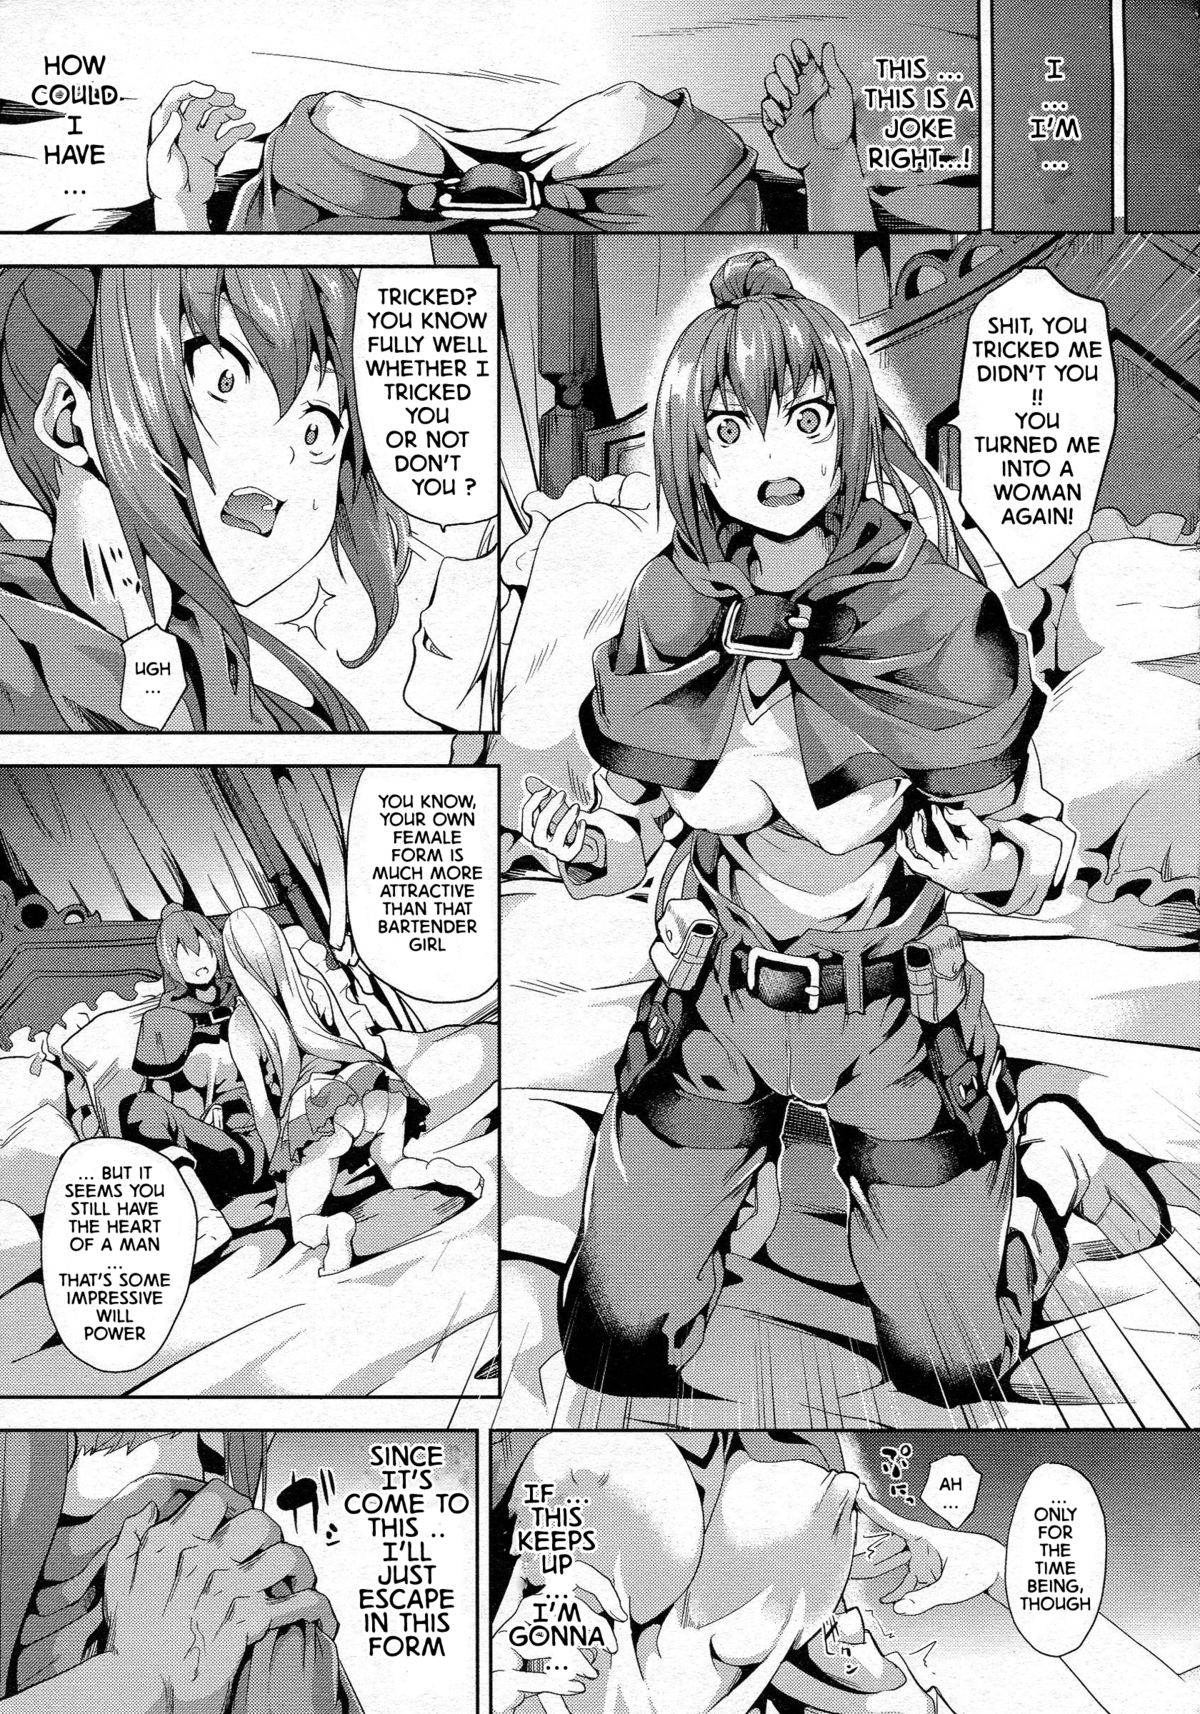 [DATE] Residence Kouhen | Residence Finale (COMIC Unreal 2015-06 Vol. 55) [English] [jabbany] page 5 full